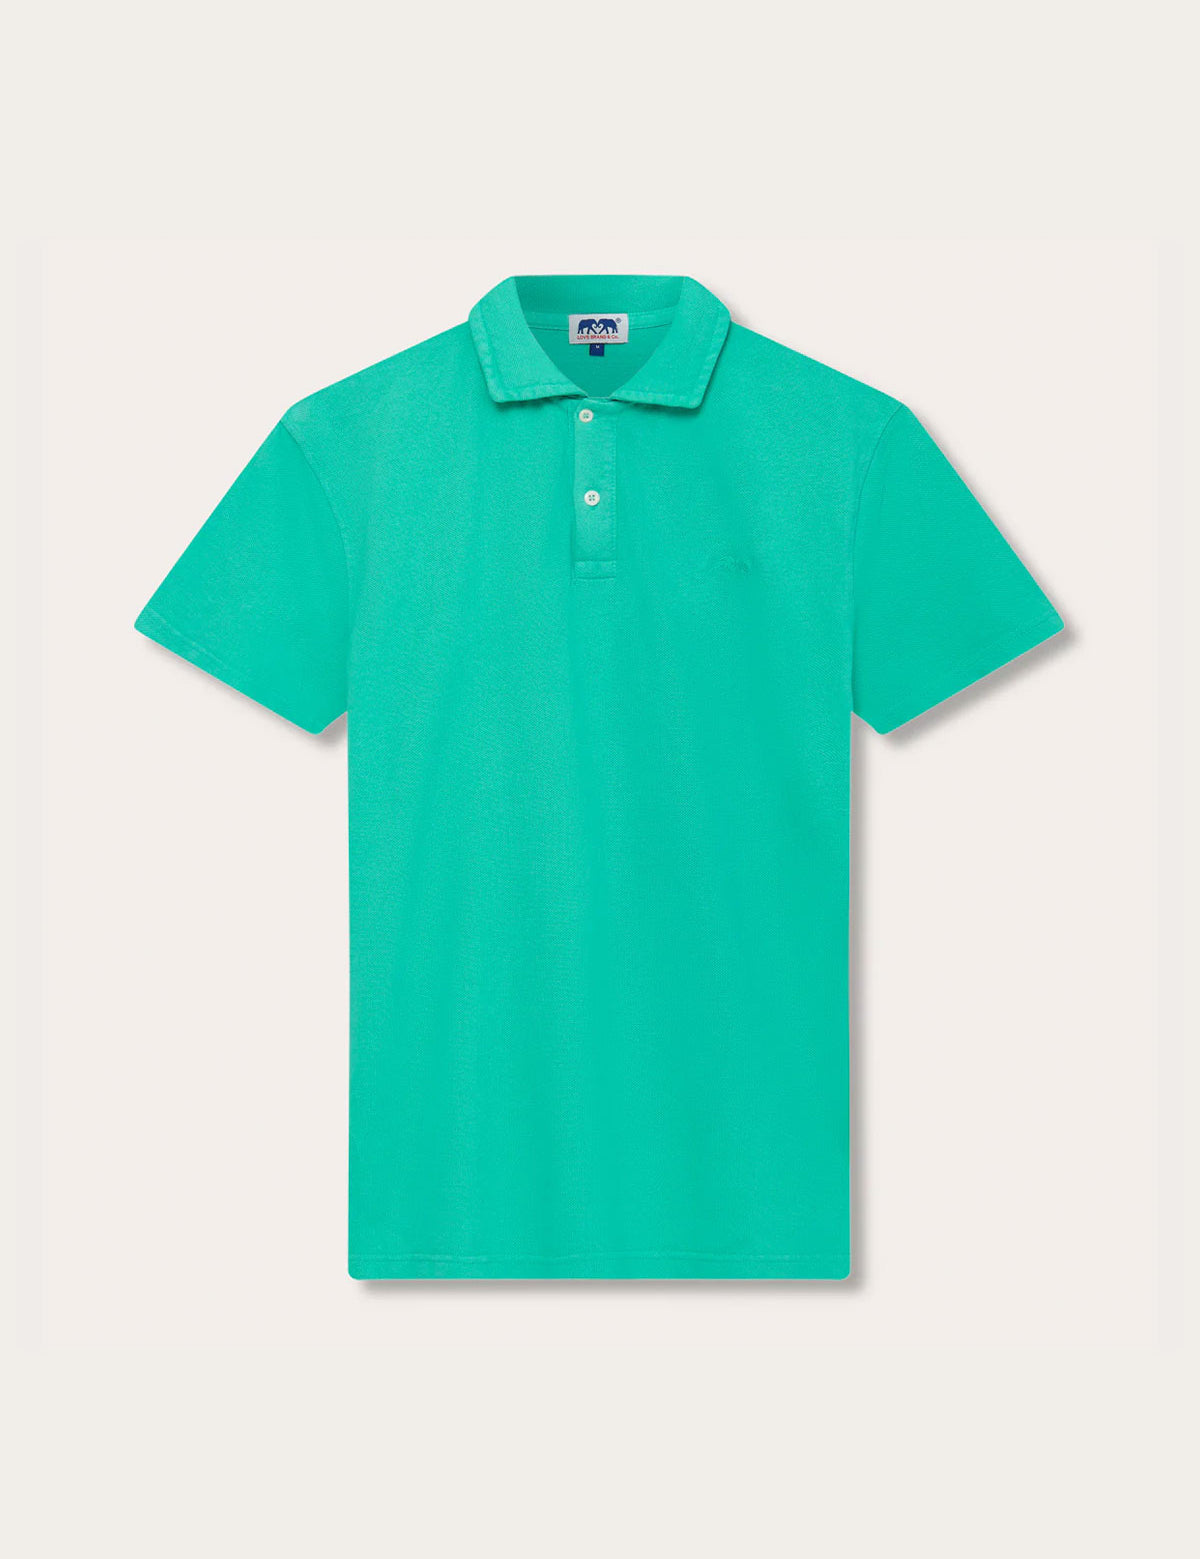 Men's Sicilian Green Pensacola Polo Shirt in vibrant green, crafted from 100% soft, breathable cotton.